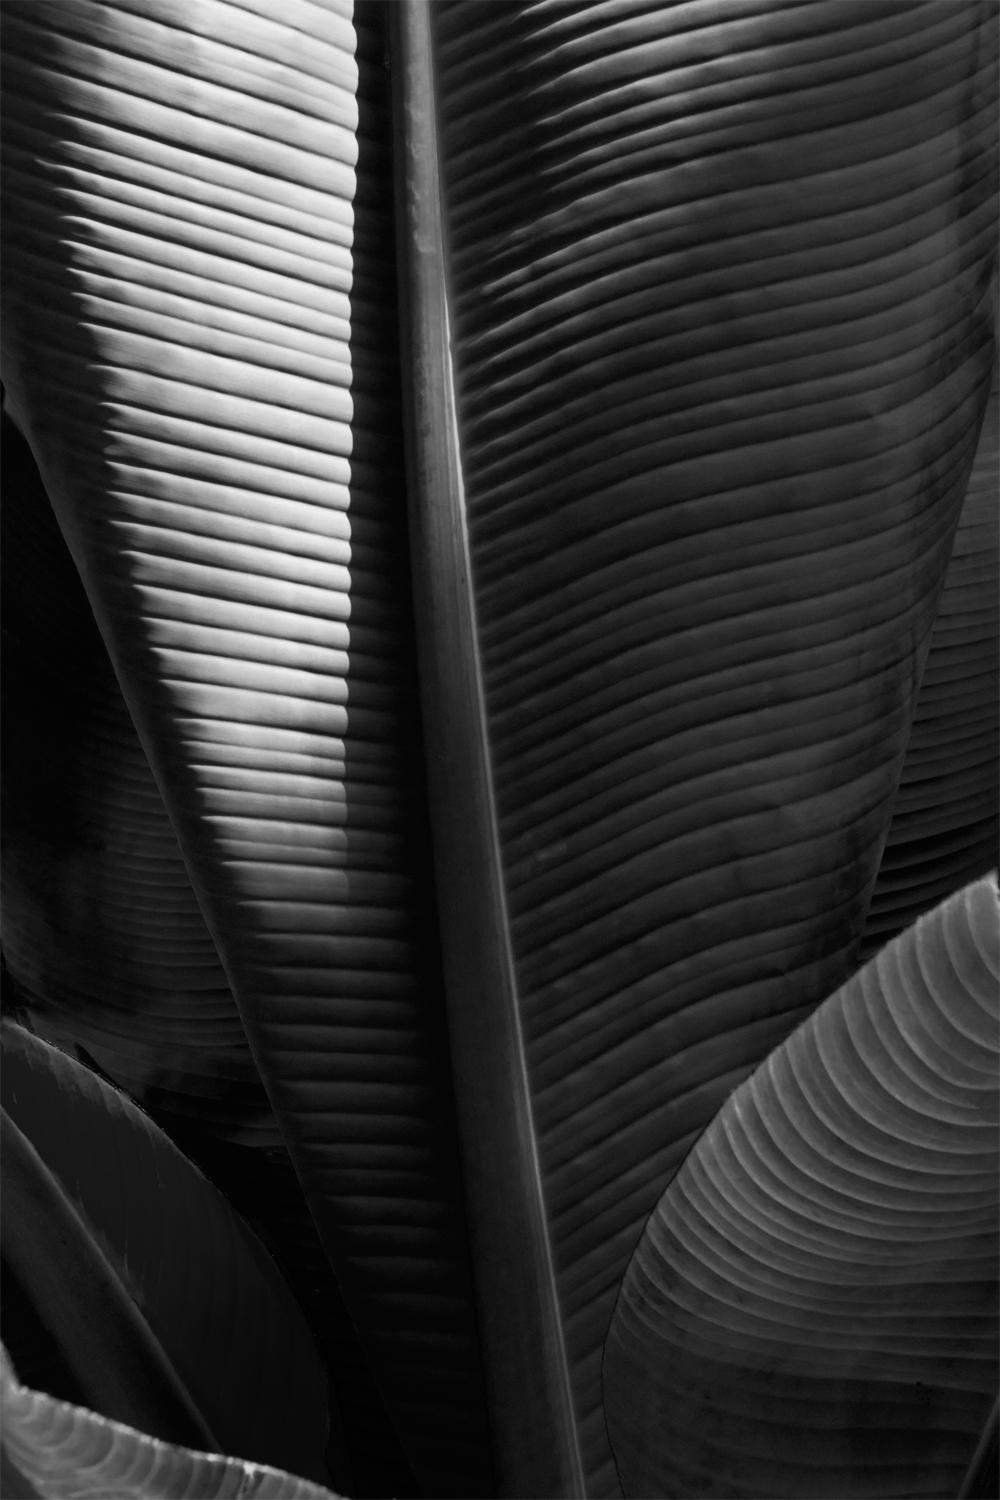 Stuart Möller Black and White Photograph - 'Leaf II' Hand Signed Limited Edition